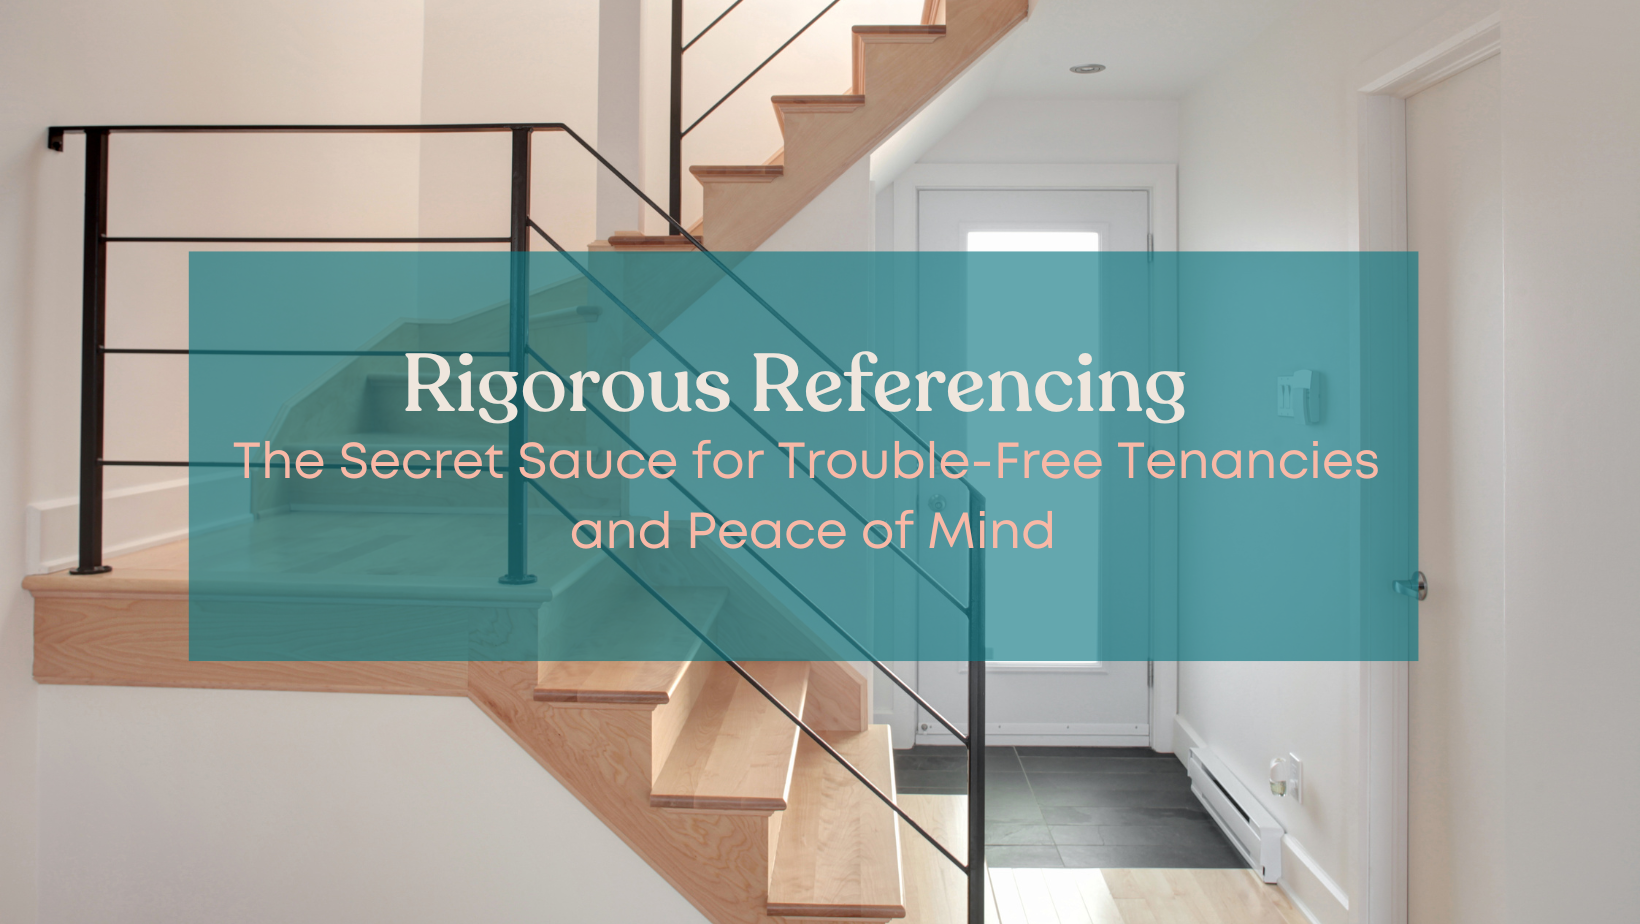 Trouble-Free Tenancies and Peace of Mind